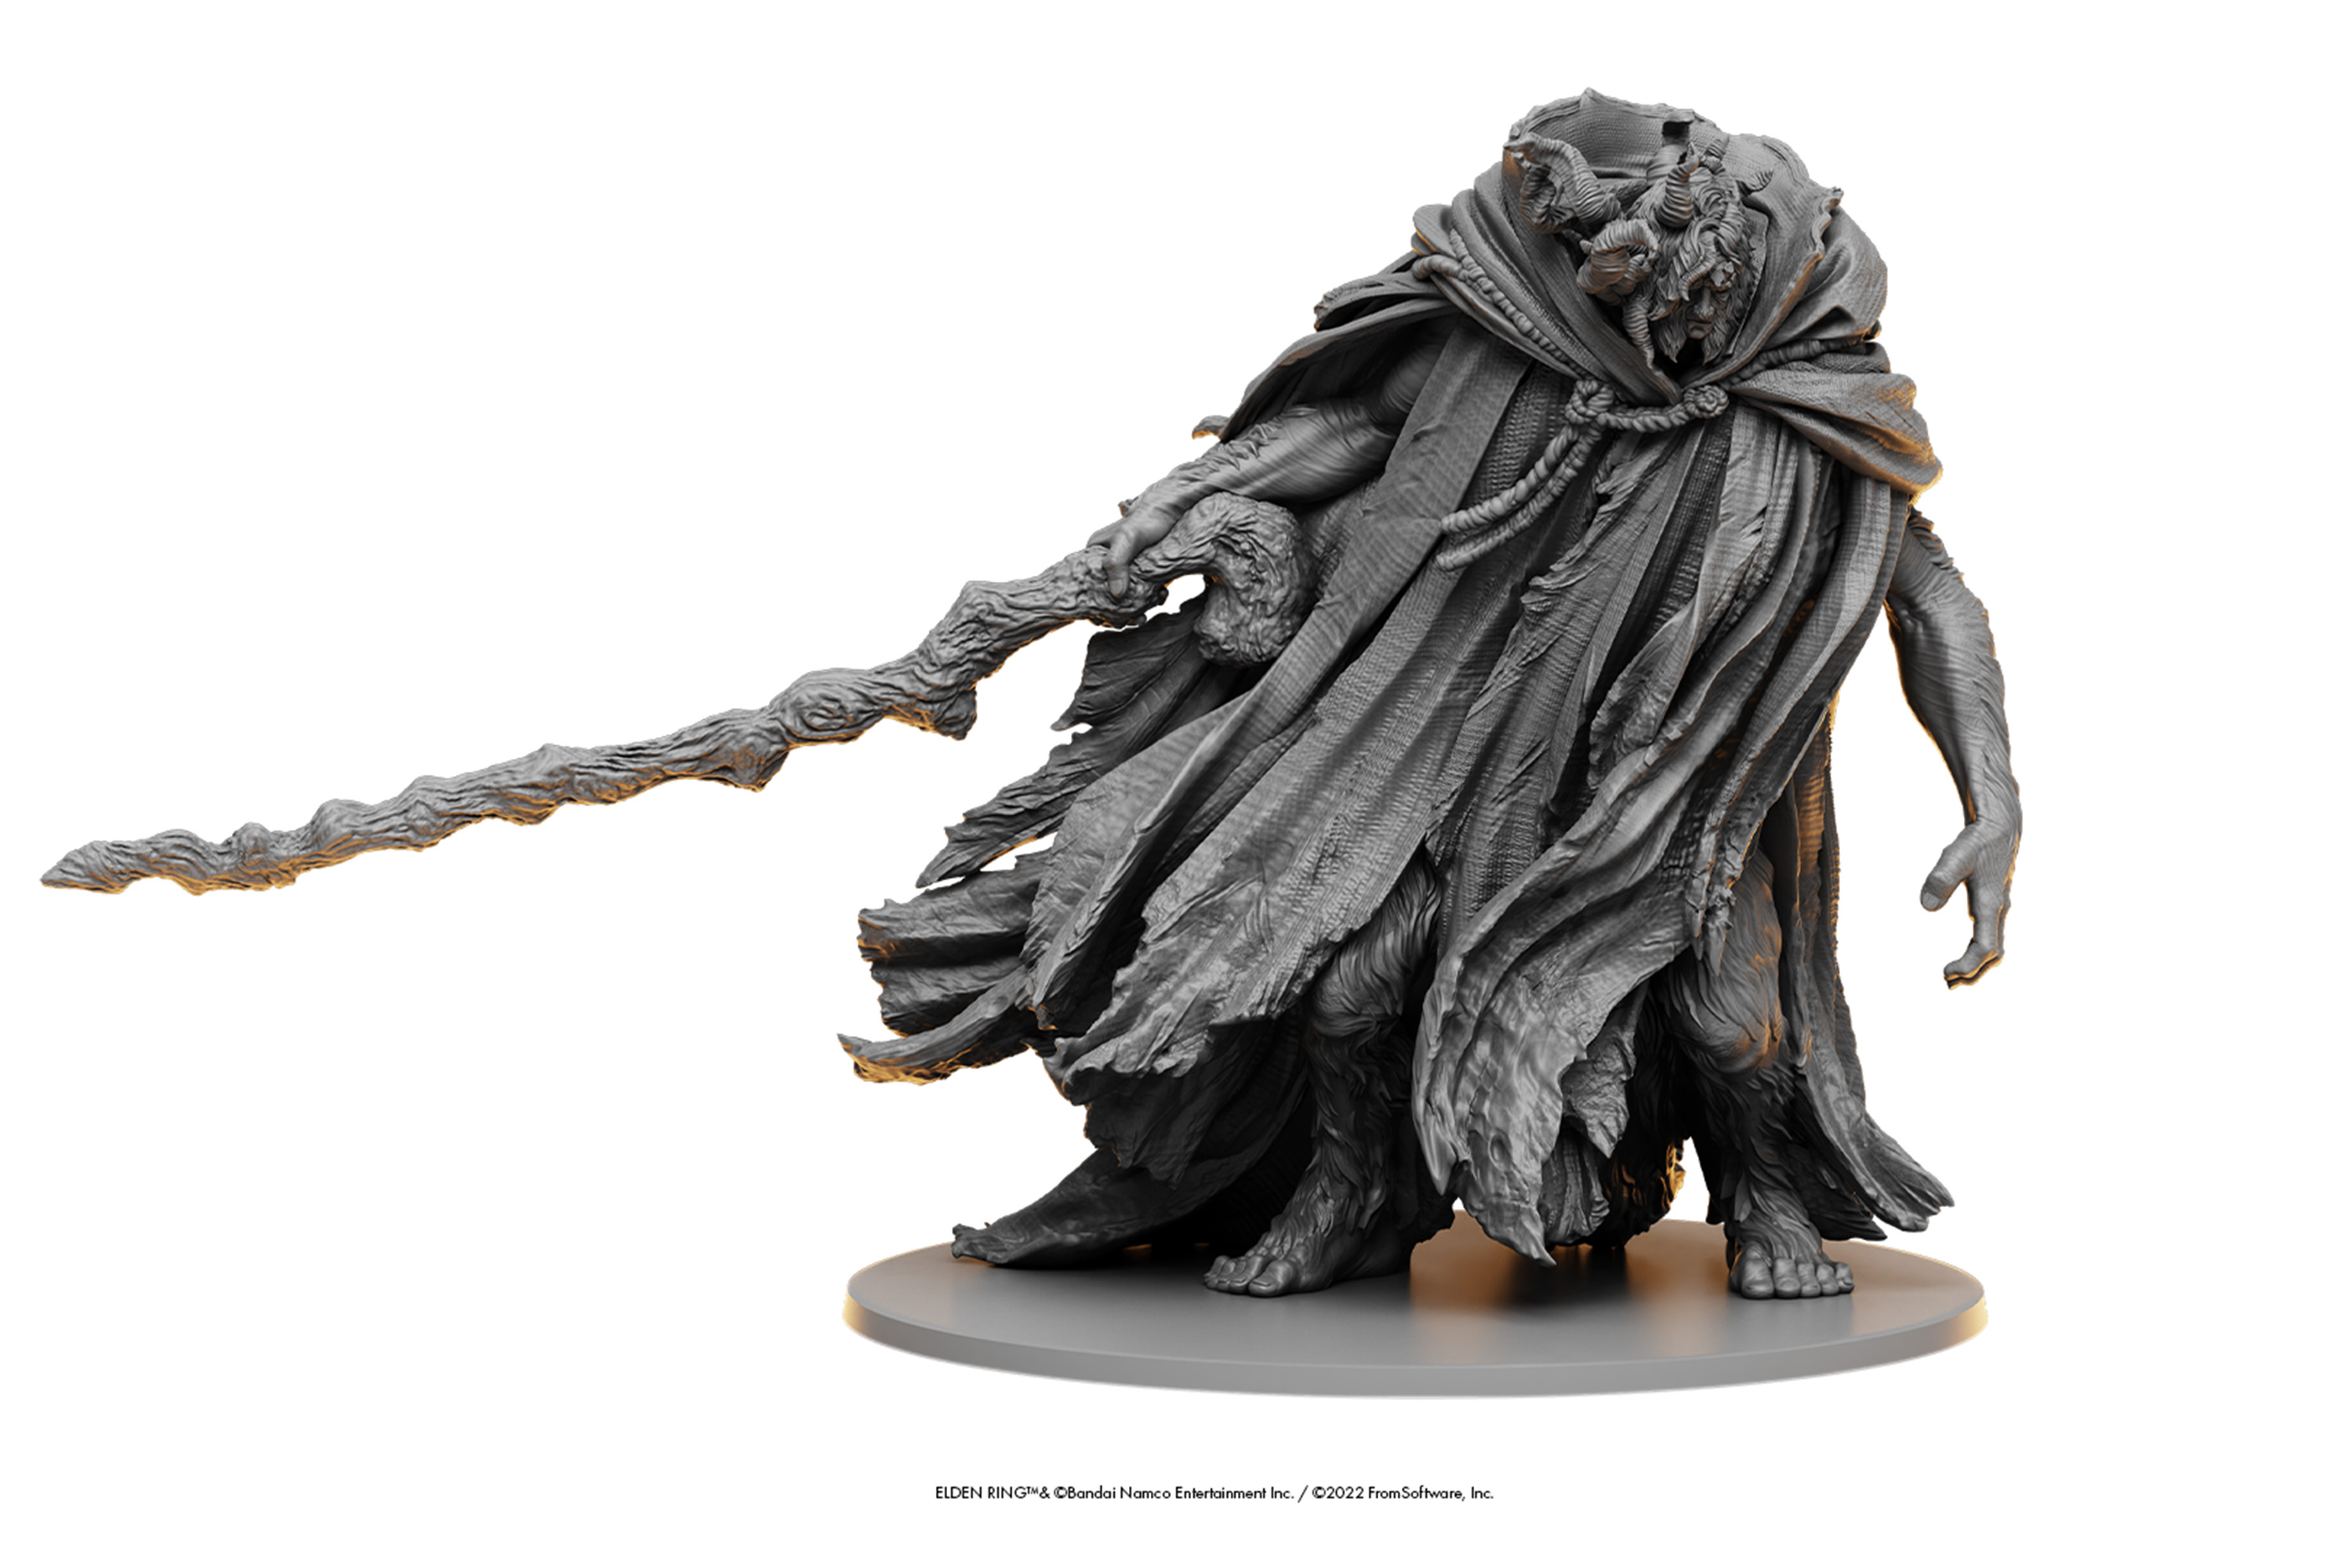 A miniature figure of a lumpy abomination that resembles Margit, from Elden Ring. It’s gray.